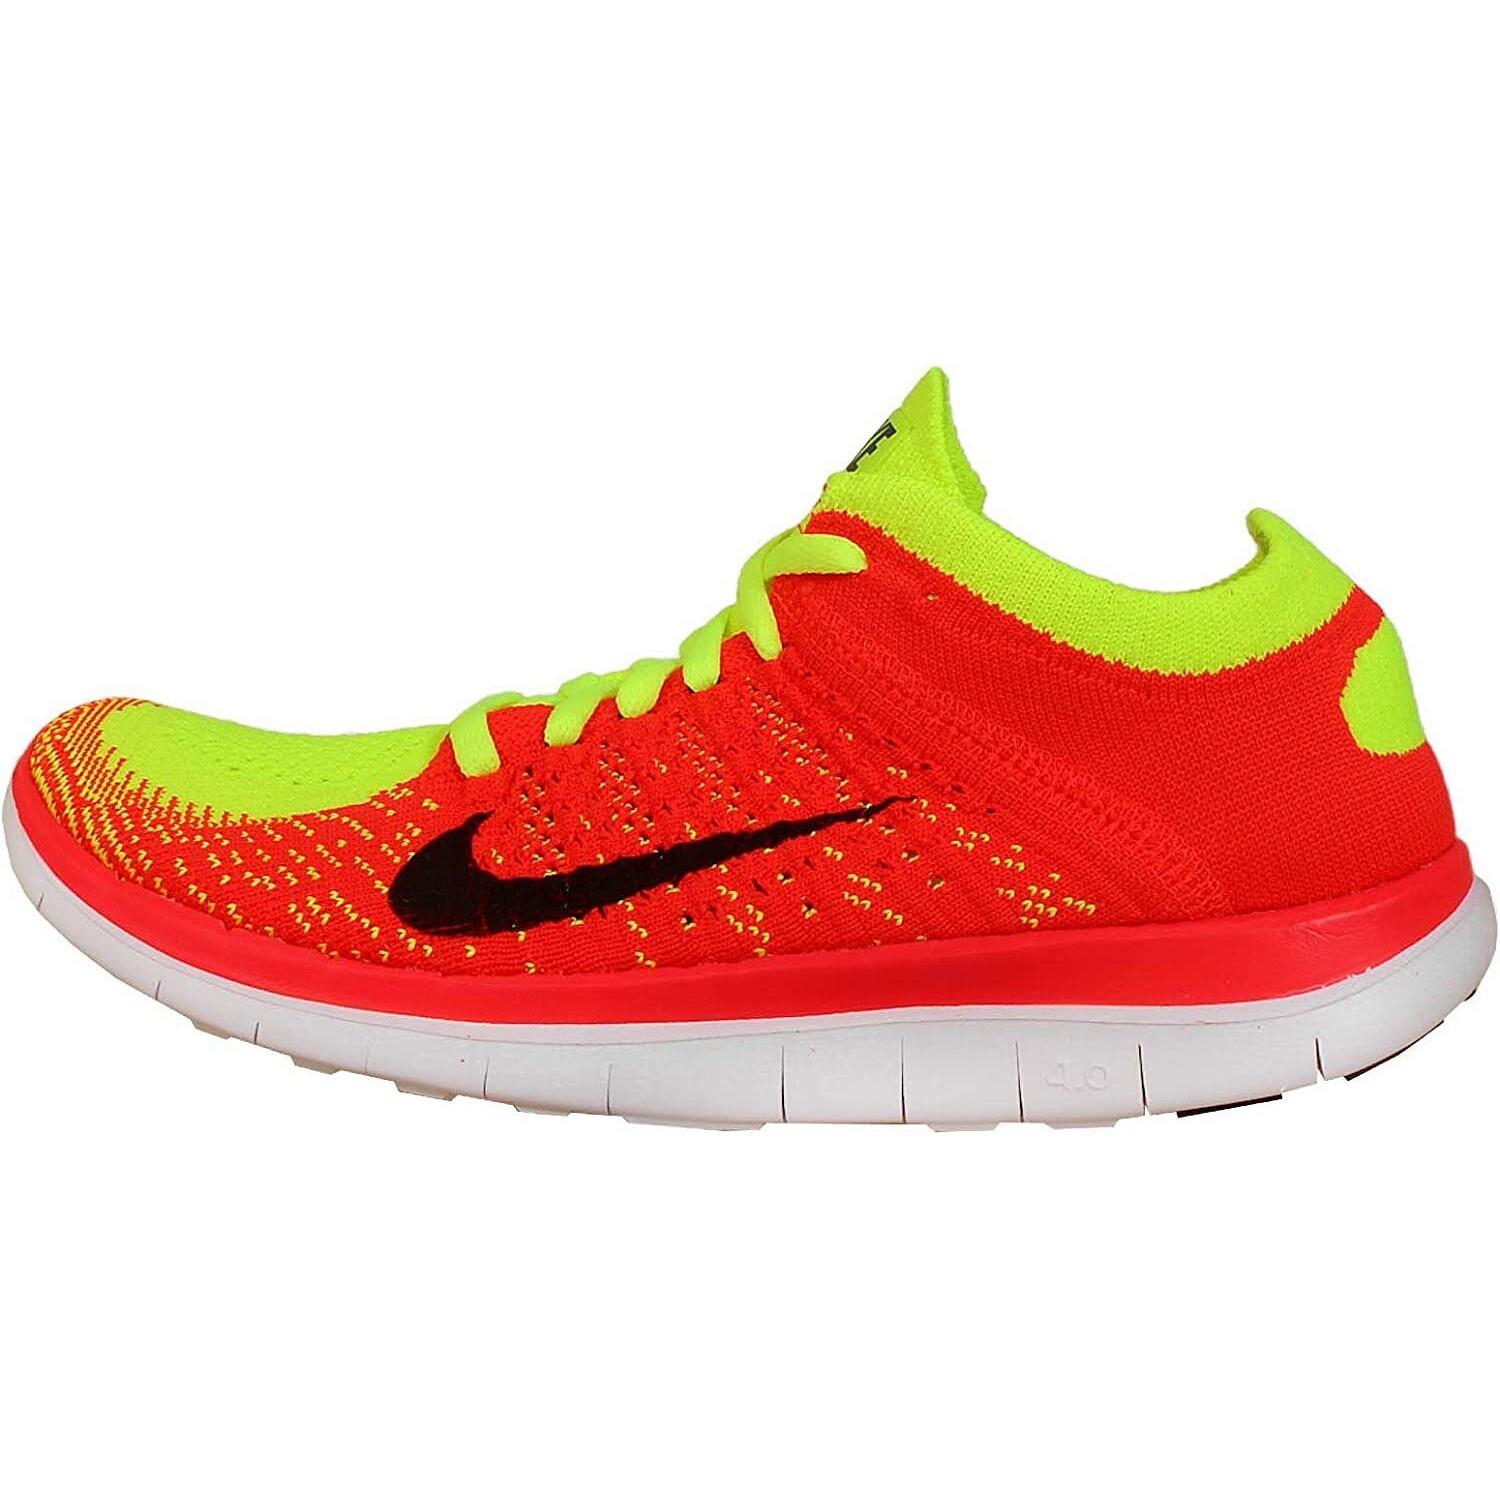 Nike Free 4.0 Flyknit Green/red/white Running Shoes 631050 700 Women Size 6